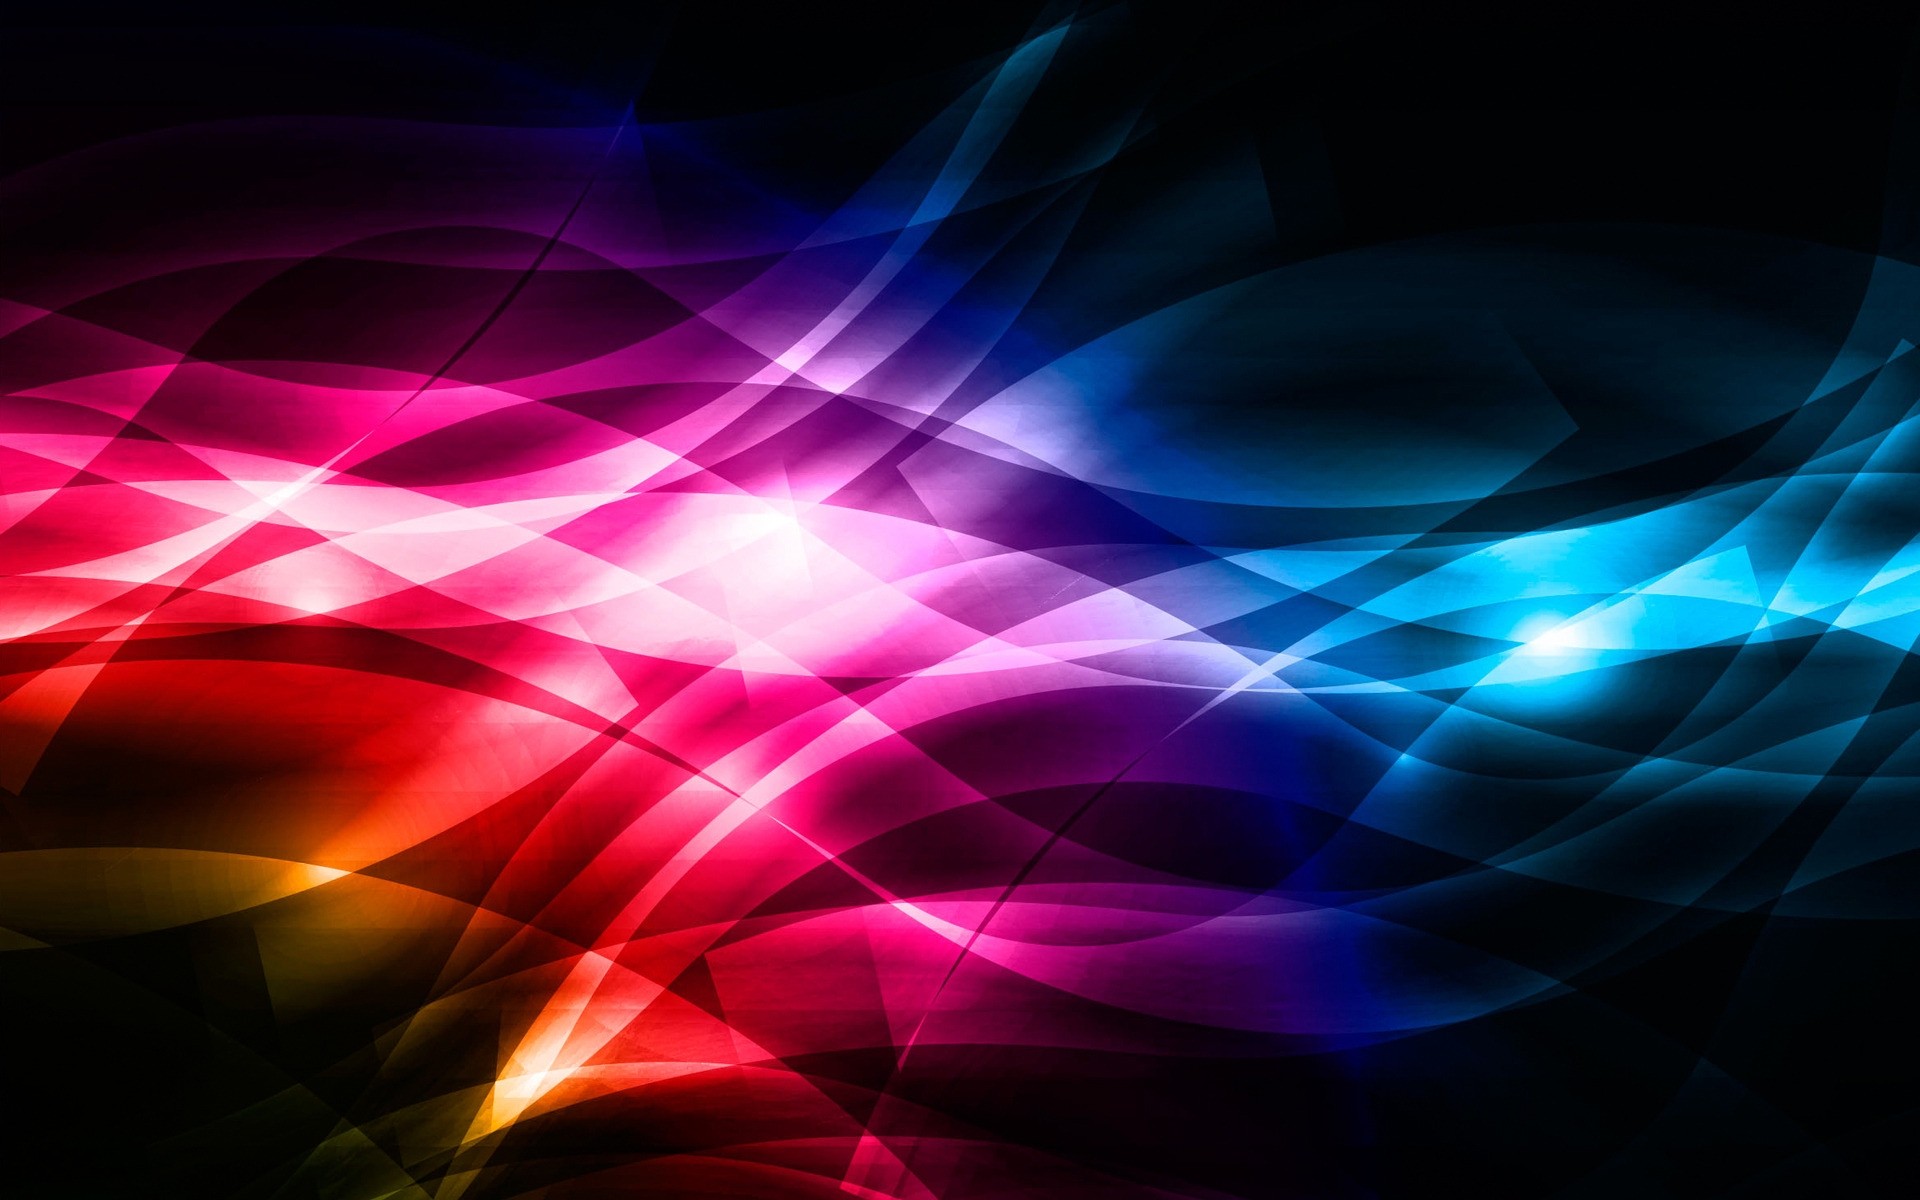 Abstract Design Dynamic Wallpaper Bright Fractal Graphic - Cool Colorful Background Hd - HD Wallpaper 